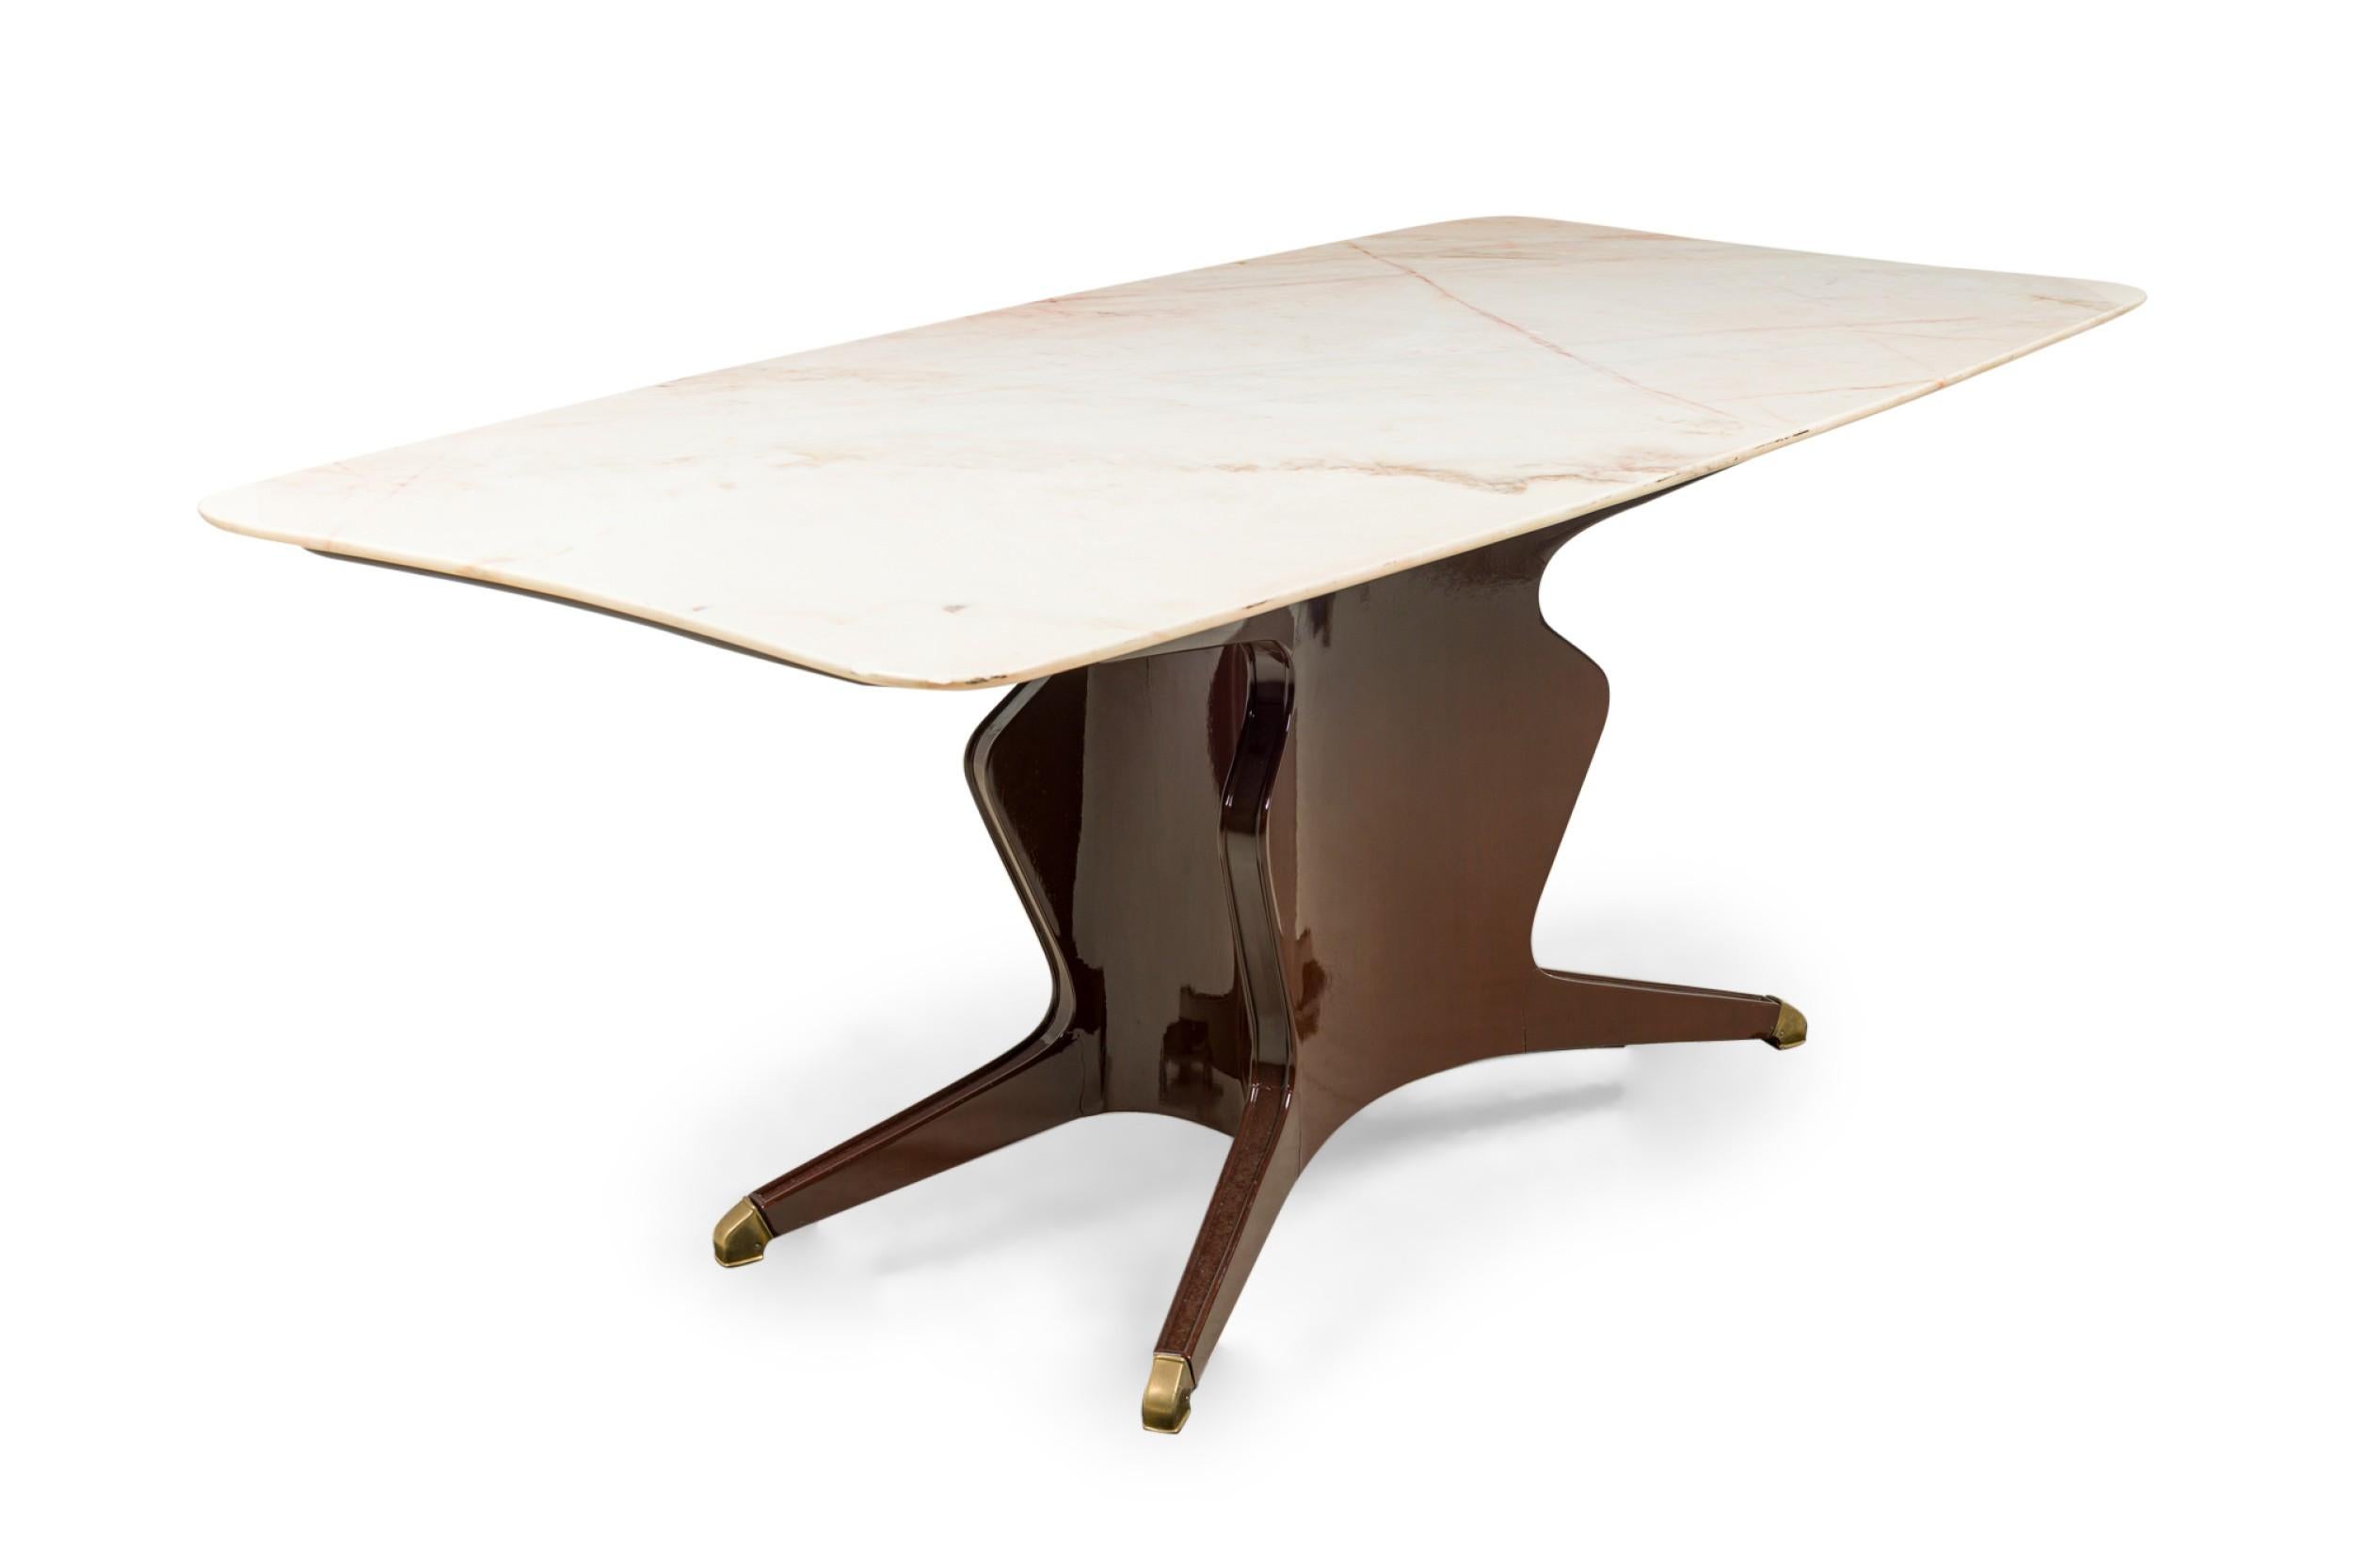 Lacquered Italian Modern Mahogany, Brass, and White Onyx Dining / Conference Table For Sale